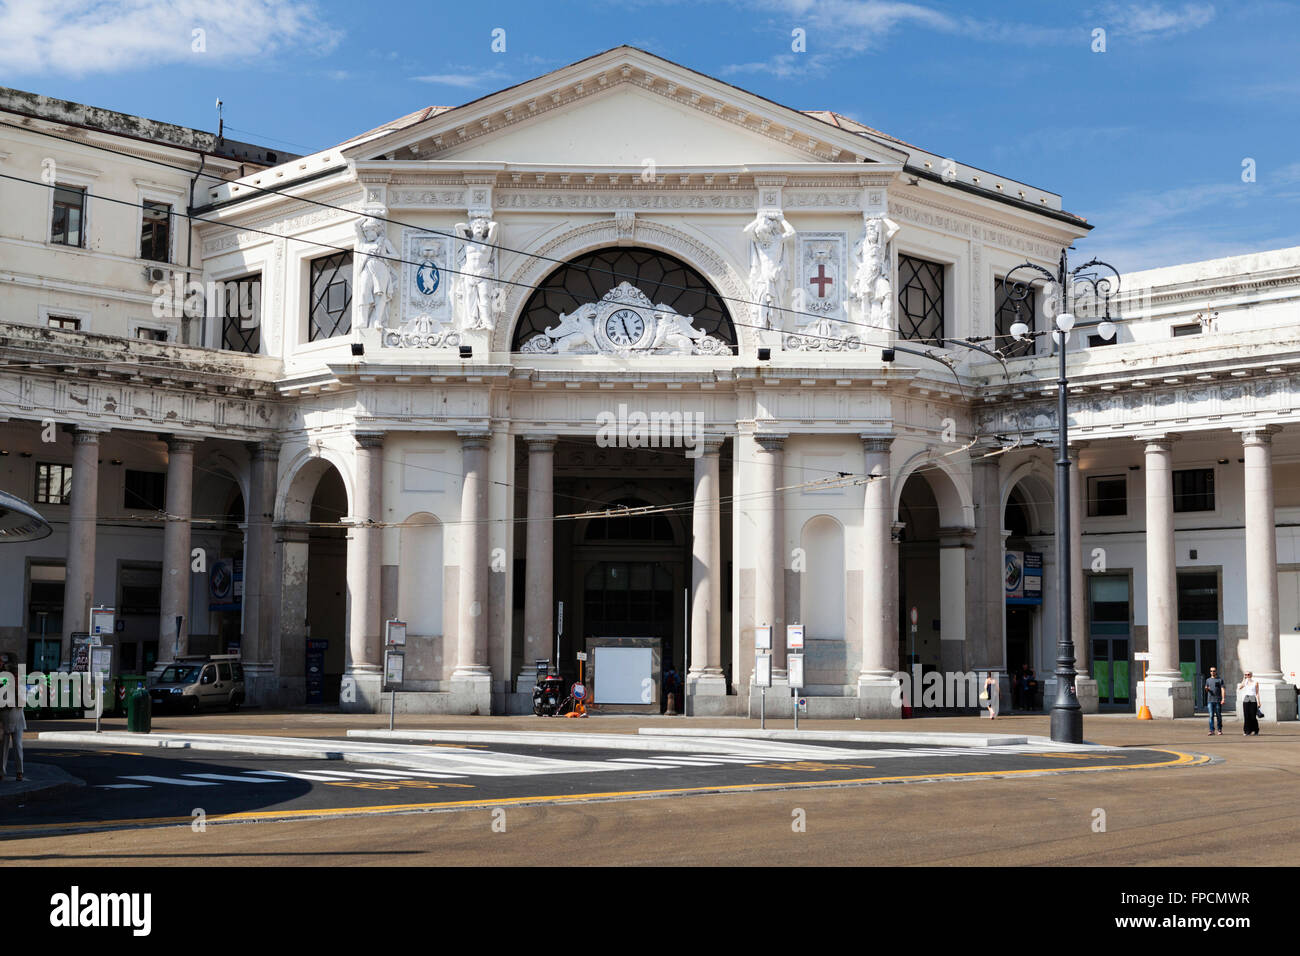 An exterior view of Piazza Principe railway station in Genoa. Designed by Alexander Mazzucchetti. People walking on the street. Stock Photo